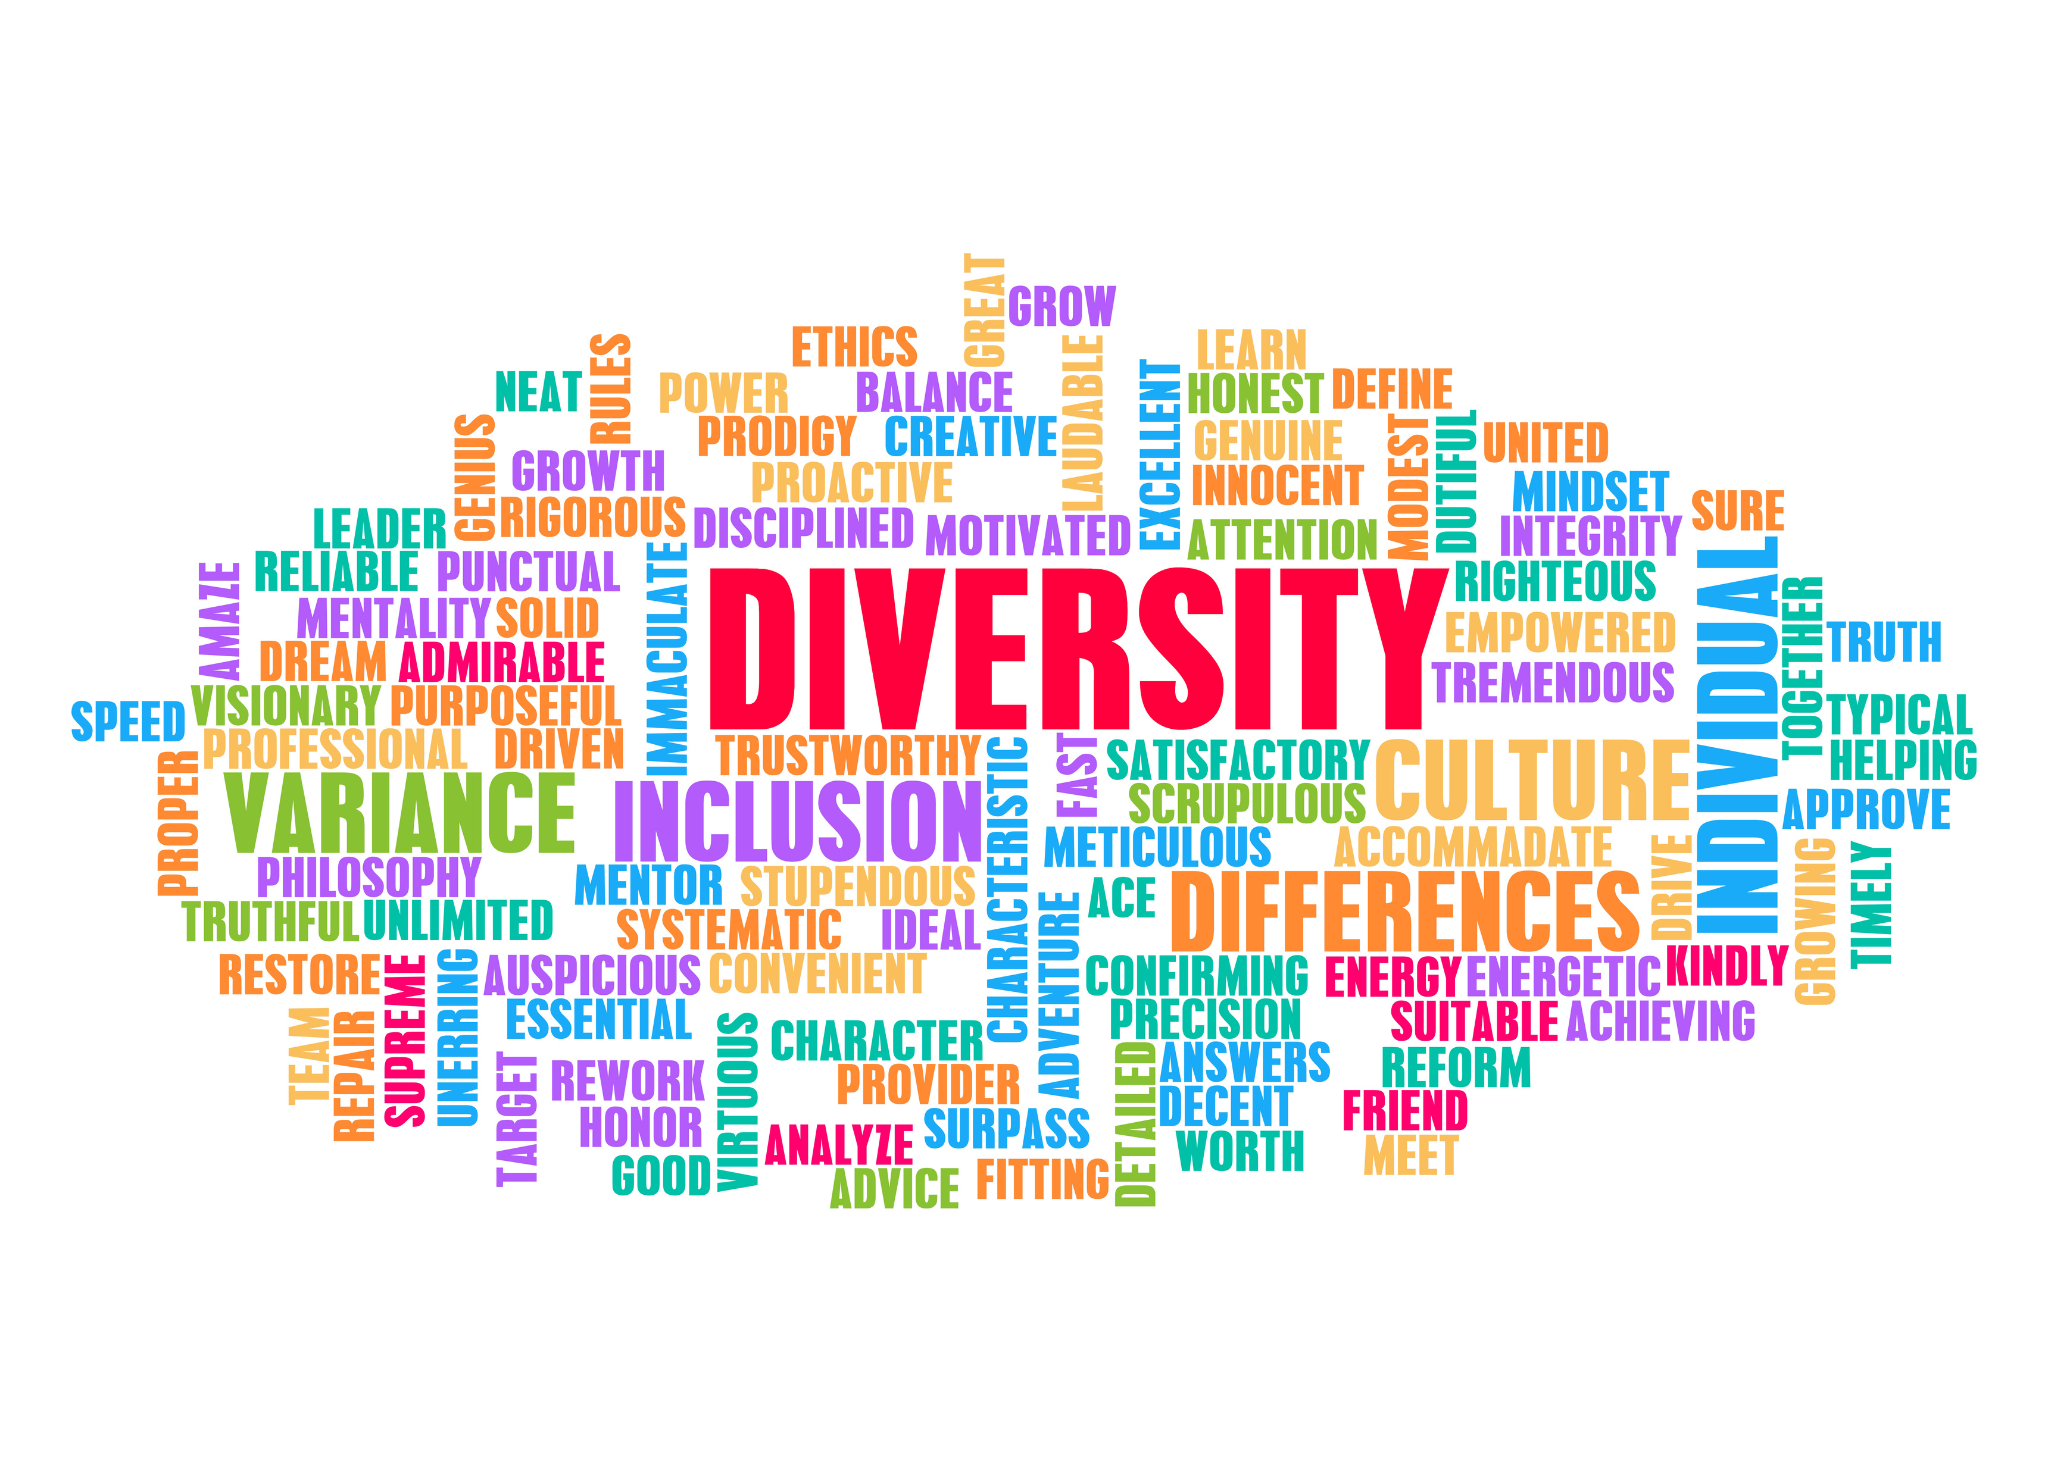 Workplace diversity has increased significantly over the years--embracing diversity and realizing its benefits can help your business compete and succeed.